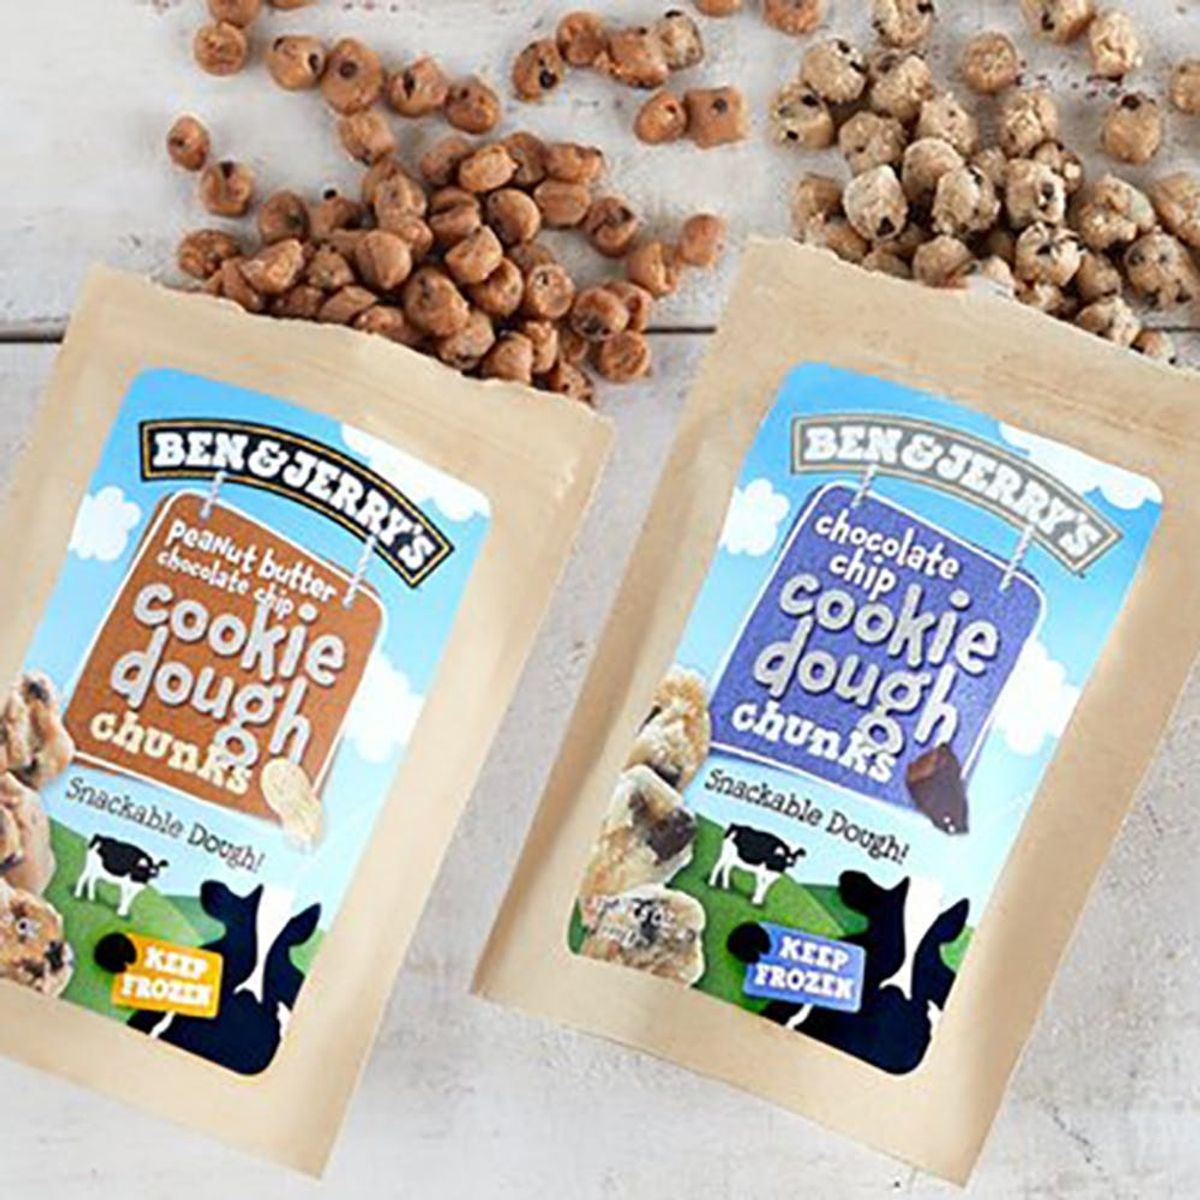 Forget Ice Cream — Ben & Jerry’s Now Sells Bags of Snackable Cookie Dough